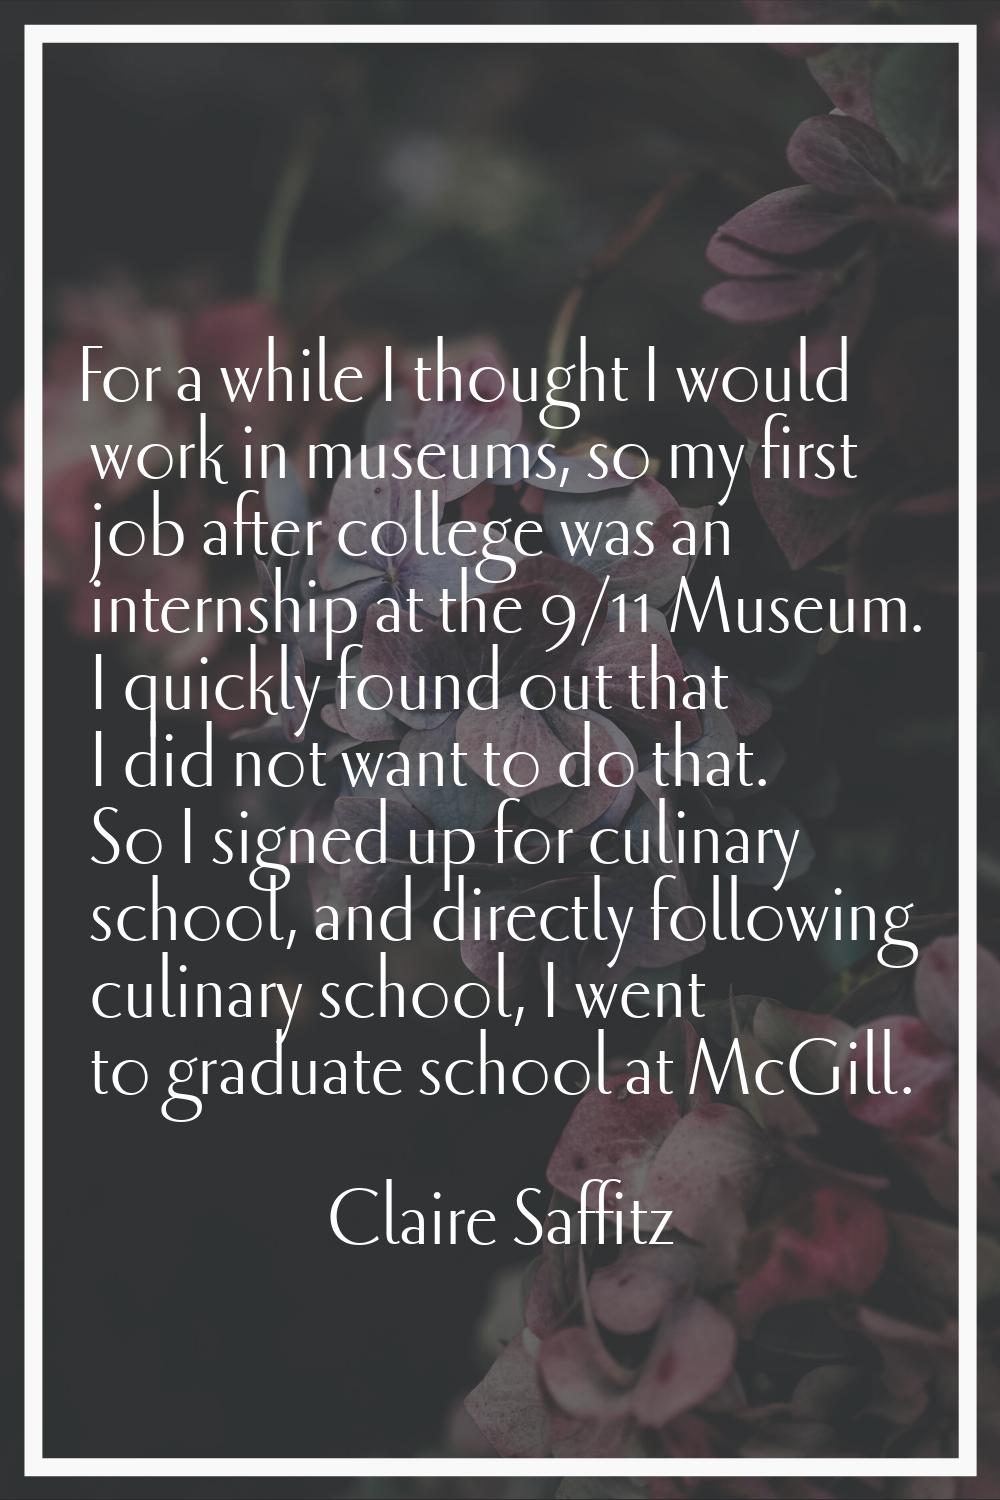 For a while I thought I would work in museums, so my first job after college was an internship at t